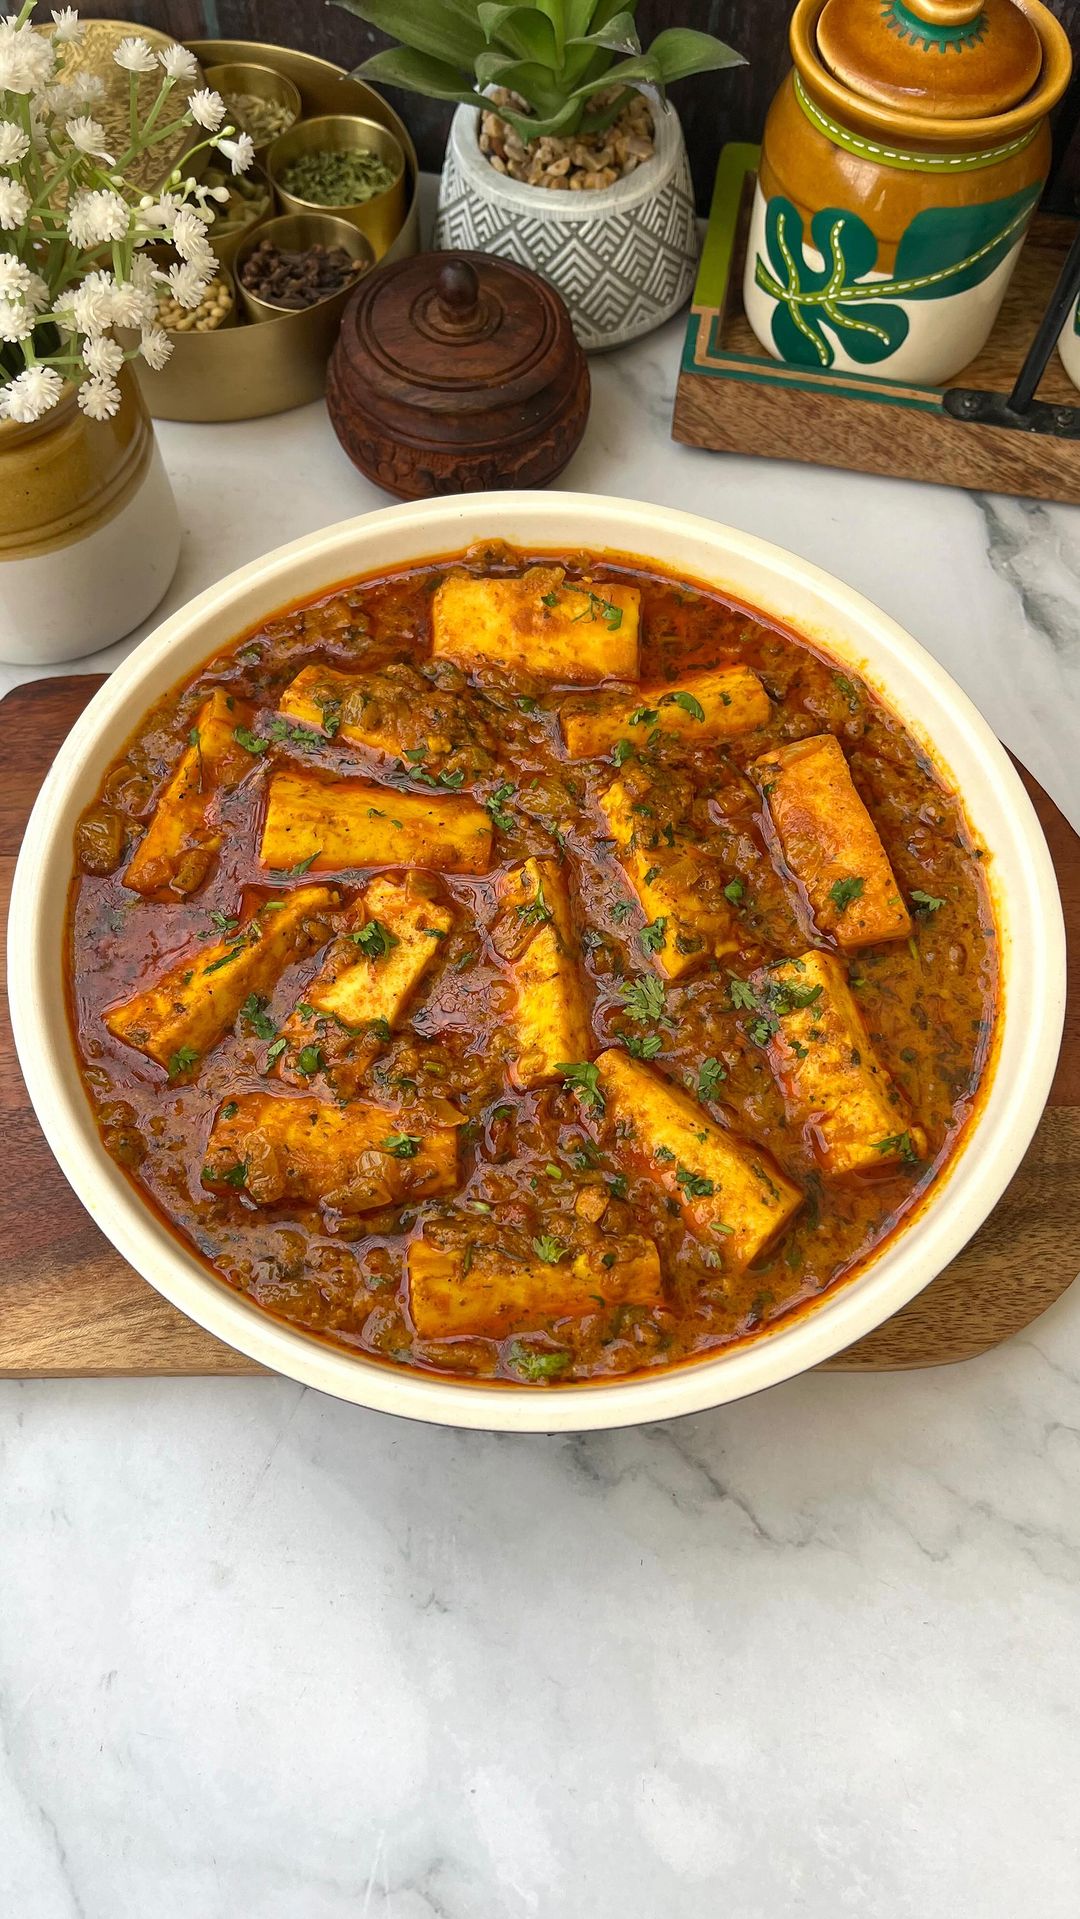 Restaurant Style Paneer Changezi Recipe😍

We made it in Pigeon Electric Pressure Cooker which is a Multi-Function Devic...